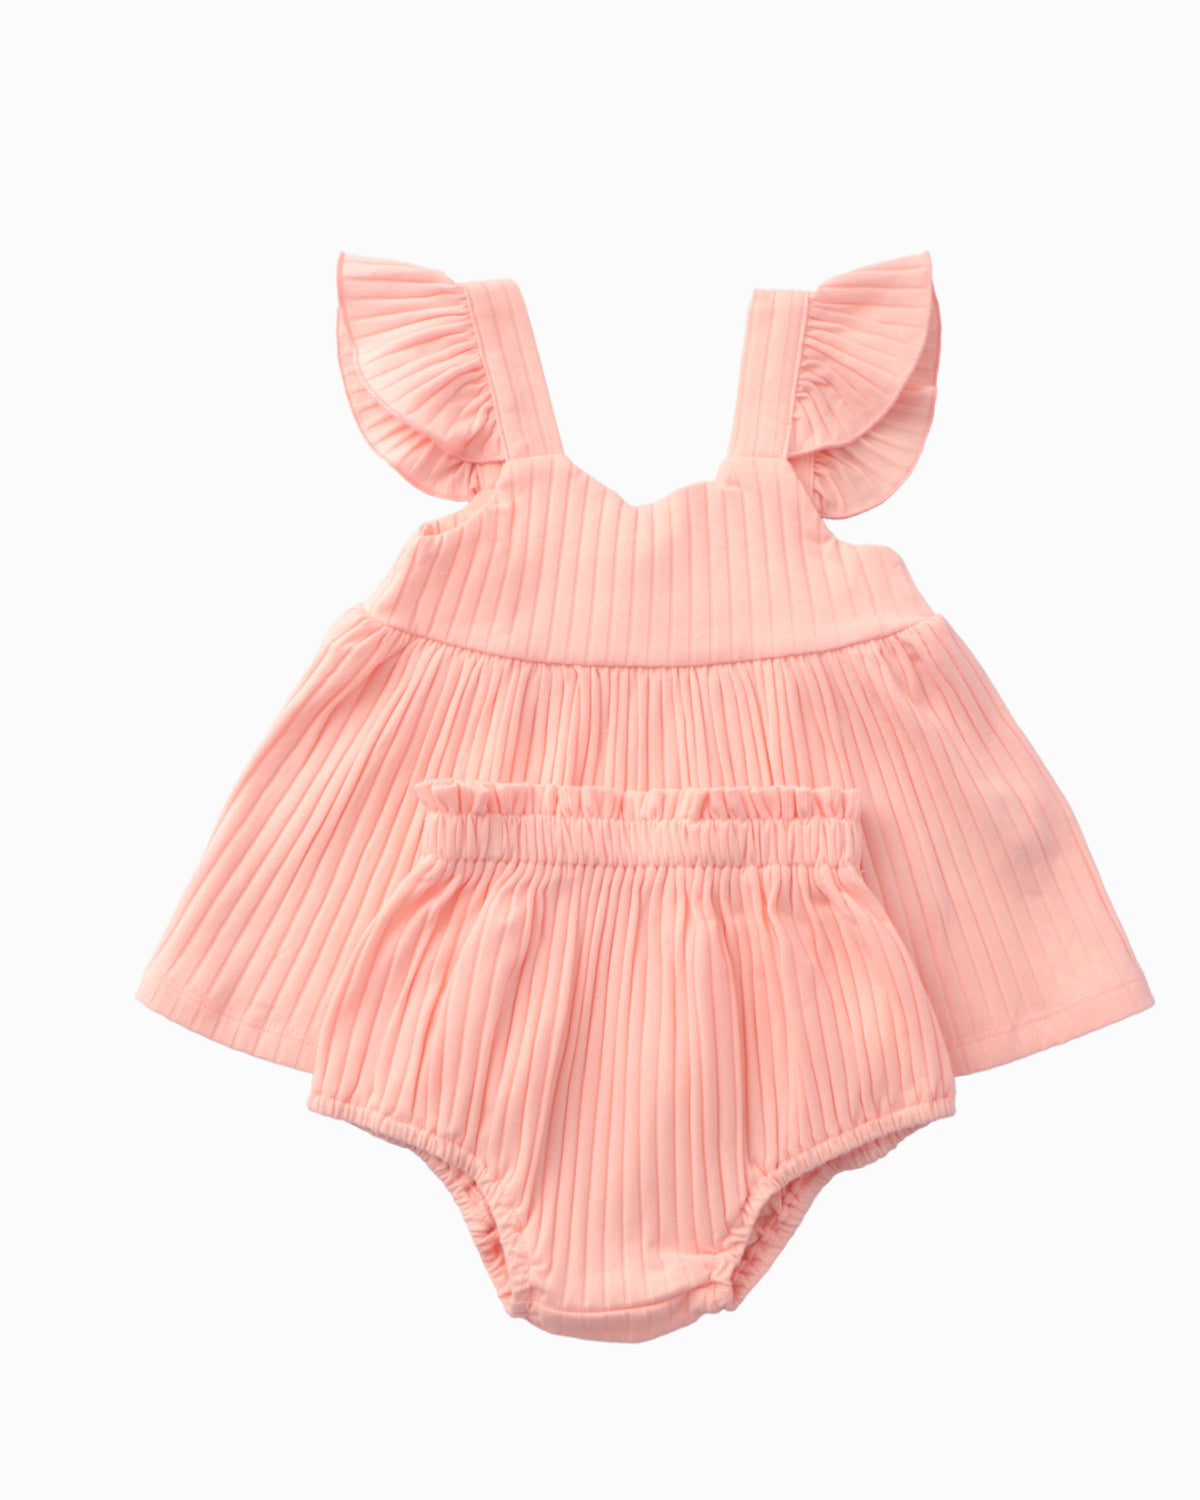 Ribbed Flutter Dress and Bloomers Set in Pink